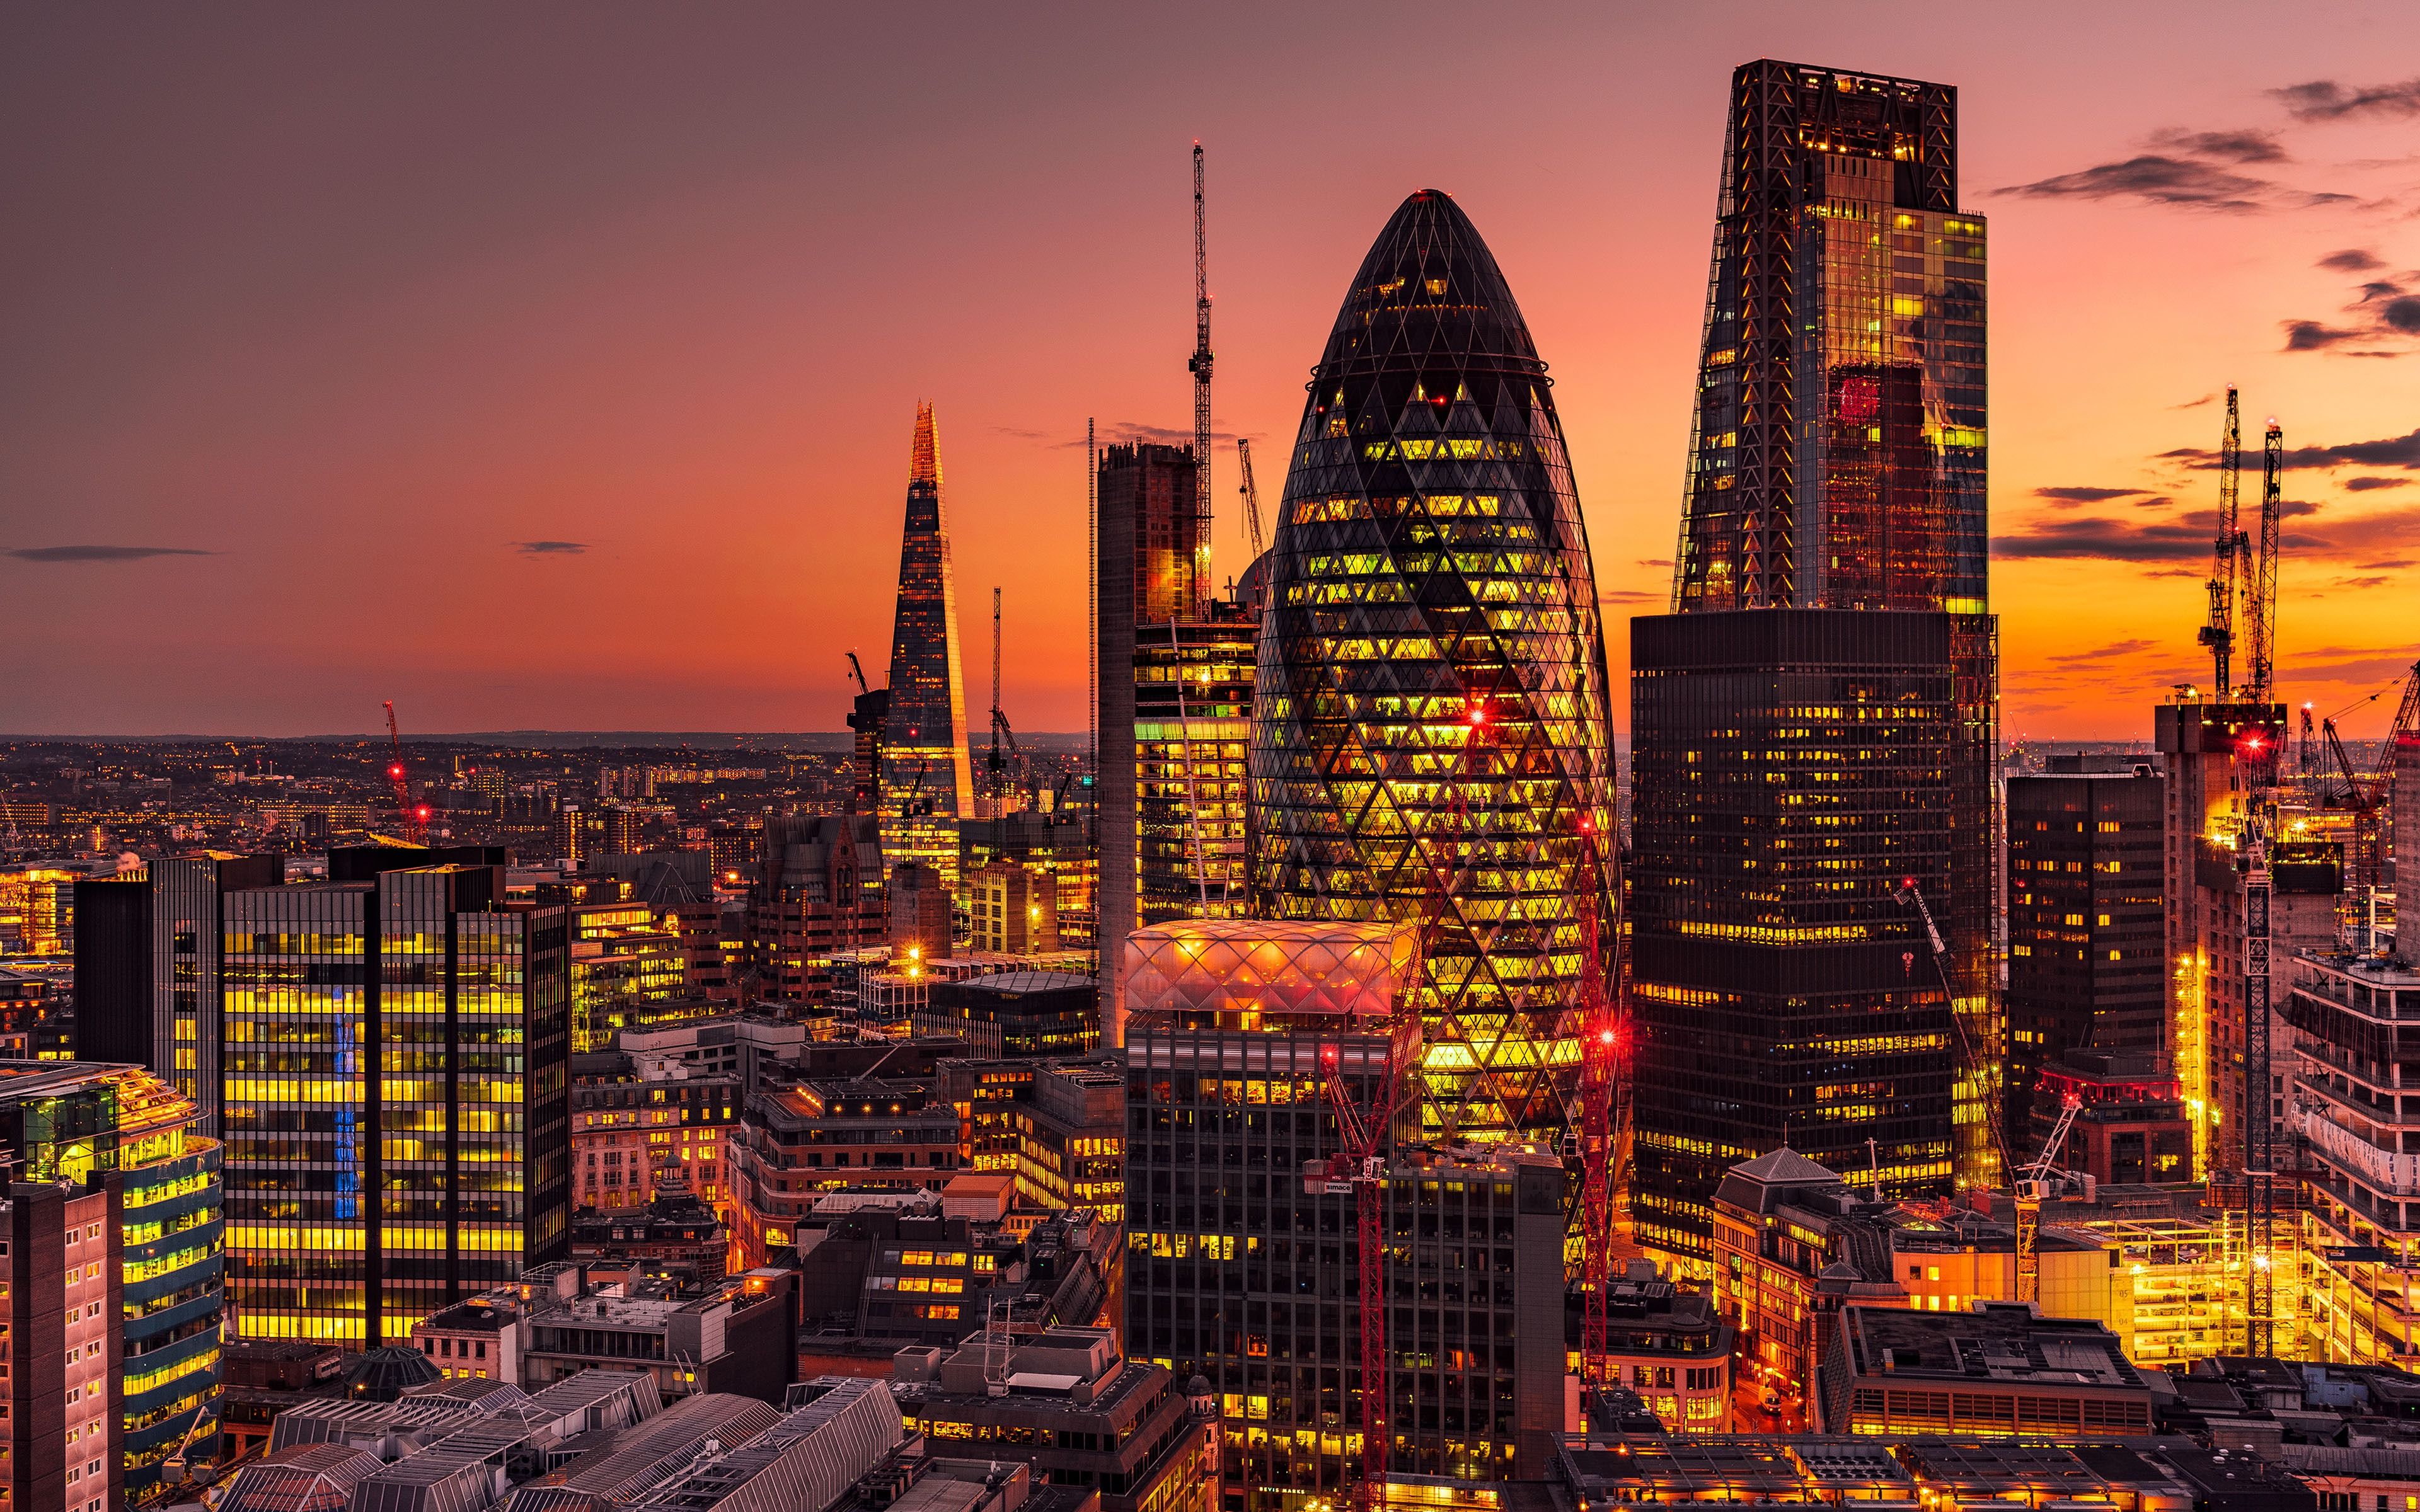 Download wallpaper London, skyscrapers, The Shard, 30 St Mary Axe, 4k, UK, evening, business centers, city lights, modern architecture for desktop with resolution 3840x2400. High Quality HD picture wallpaper